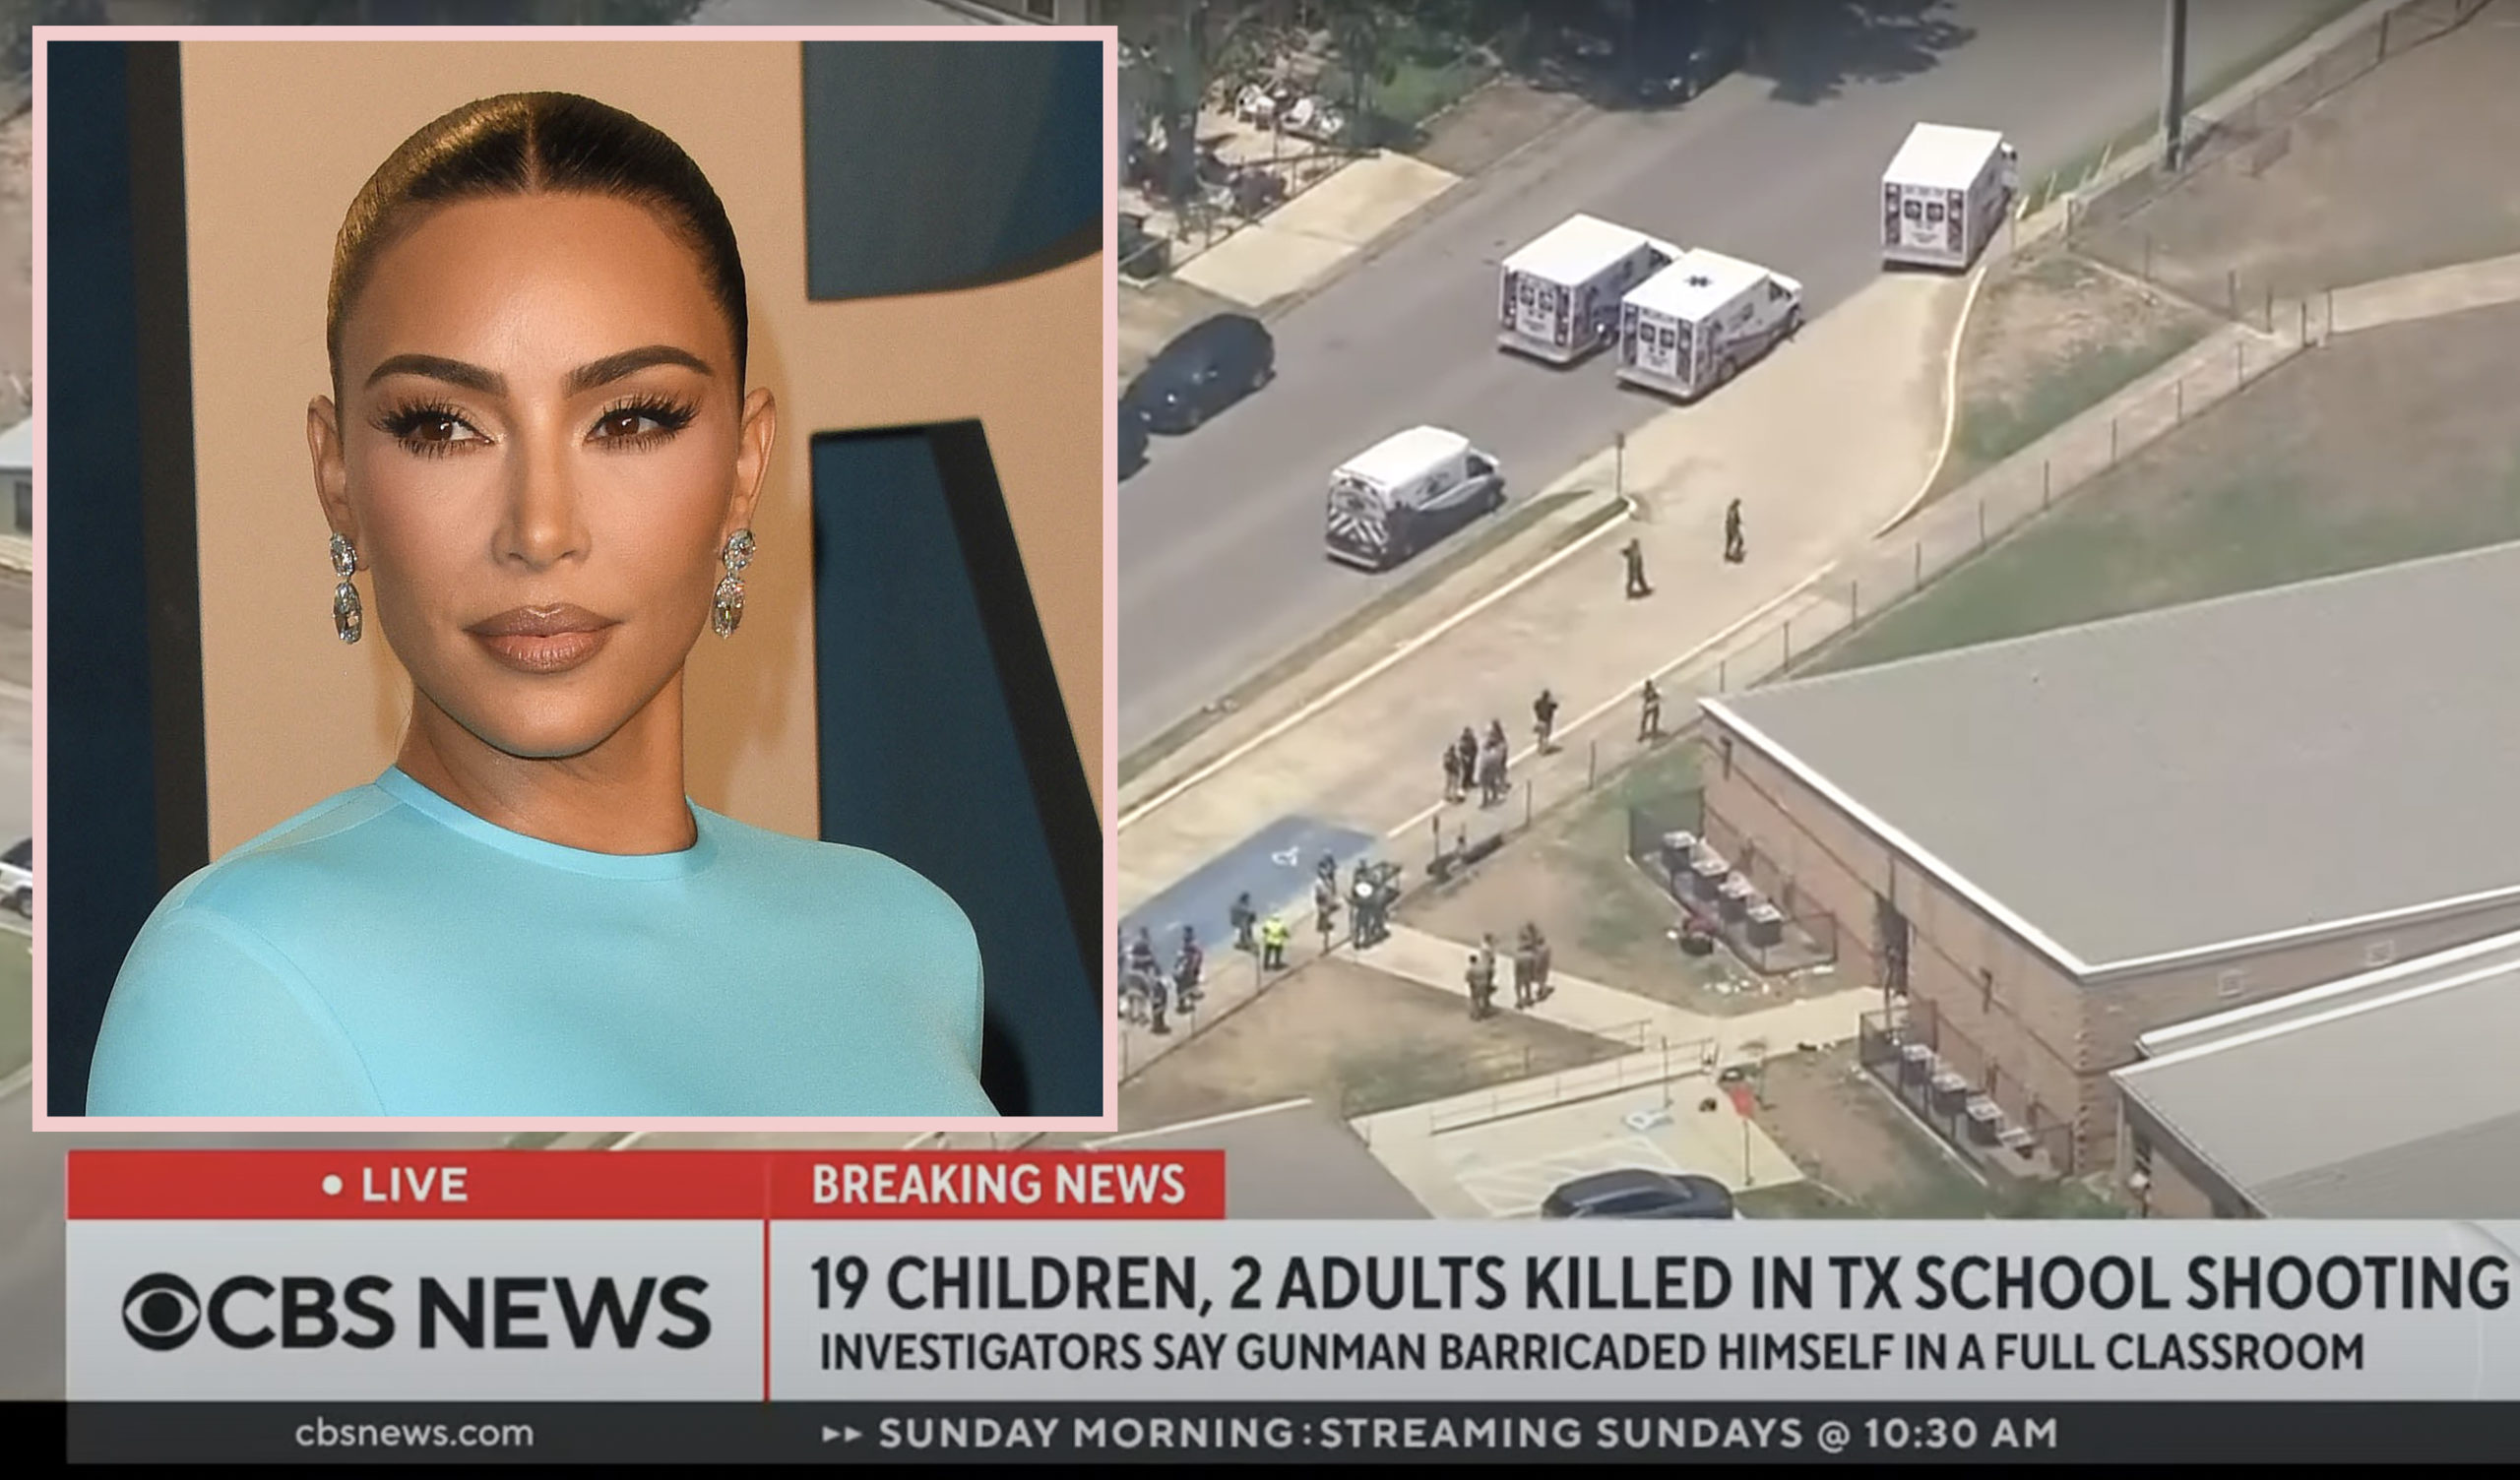 #’We Can’t Accept This As Normal’: Kim Kardashian Pleads For Gun Control After Shooting